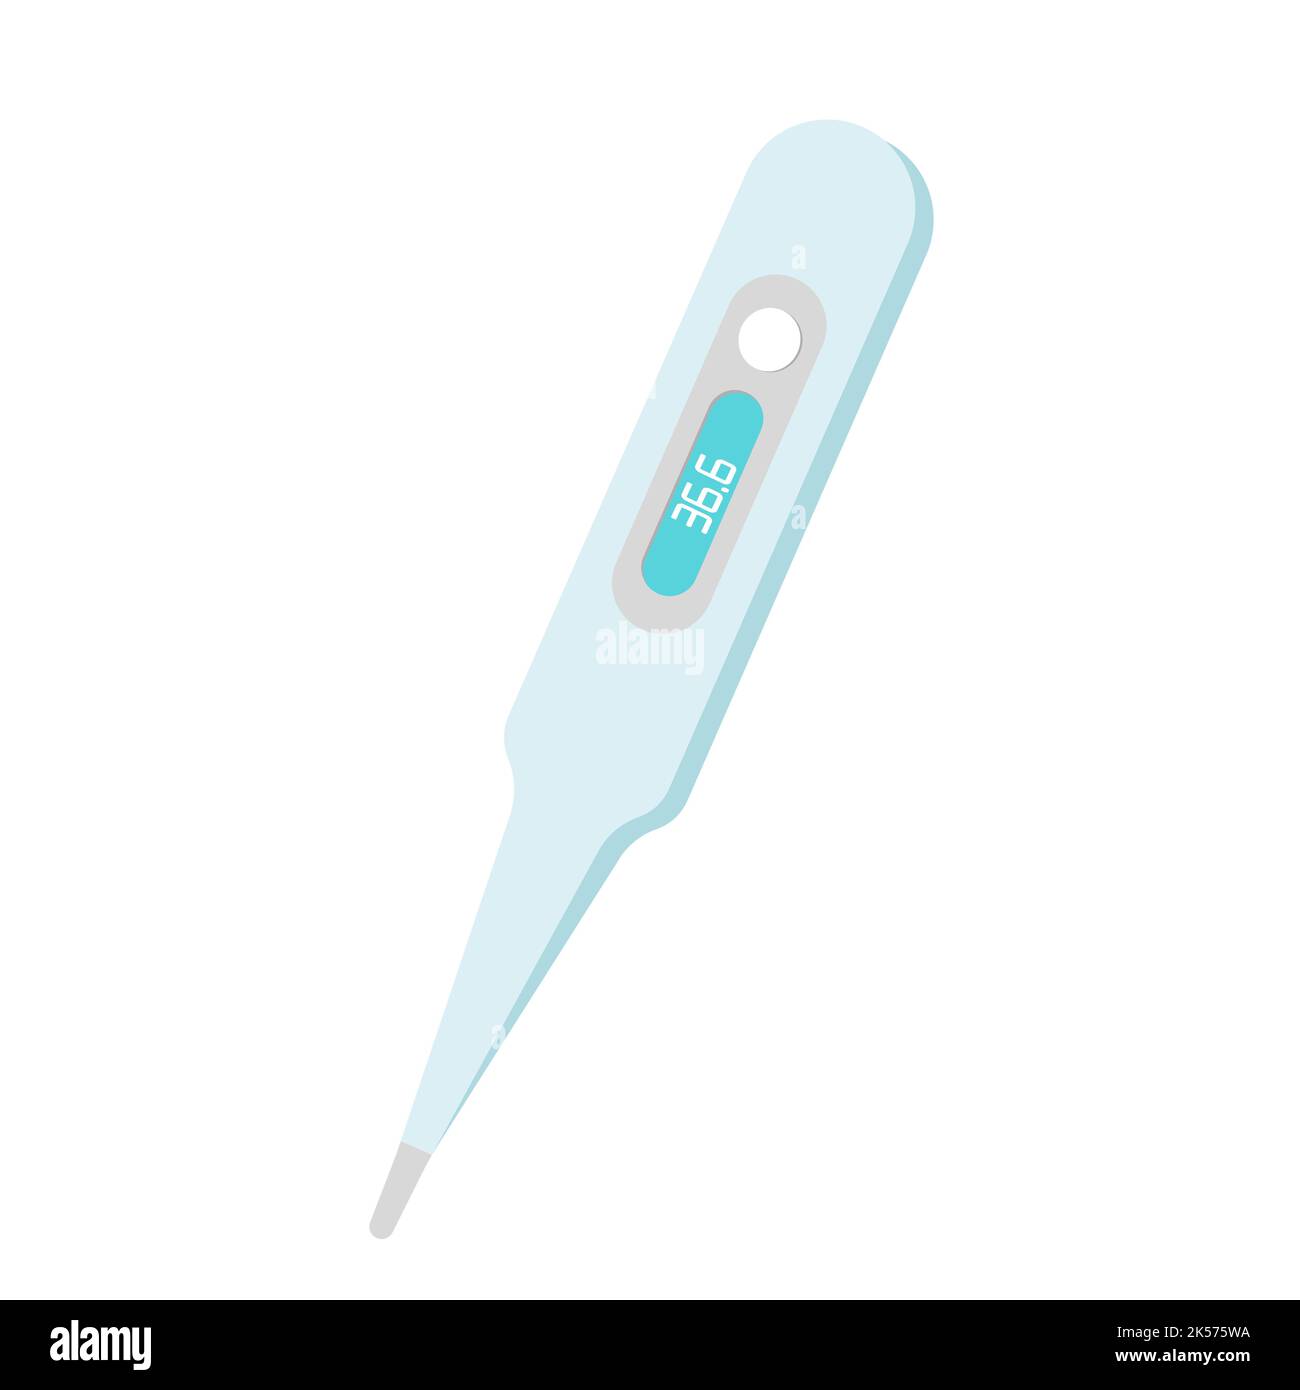 https://c8.alamy.com/comp/2K575WA/electronic-body-thermometer-isolated-om-white-background-medical-equipment-vector-illustration-2K575WA.jpg